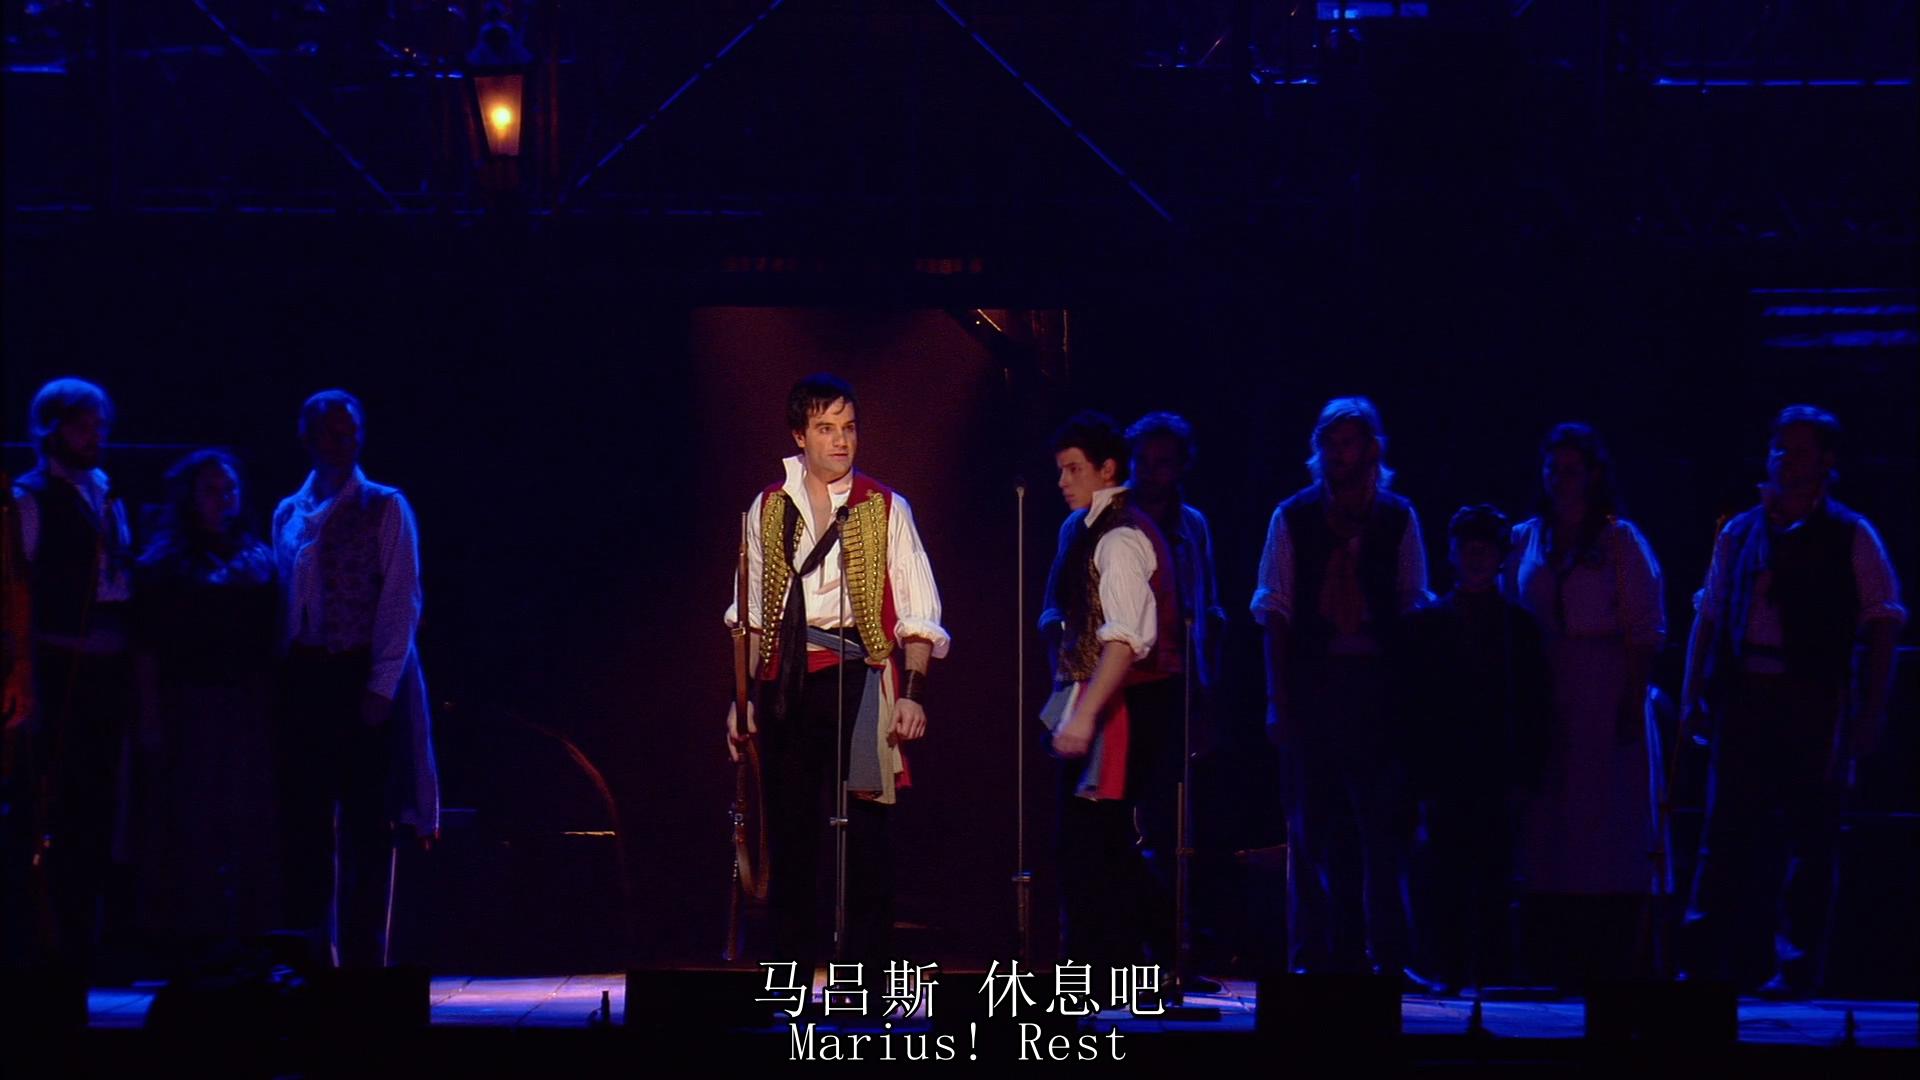 Les.Miserables.in.Concert.The.25th.Anniversary.2010.1080p.BluRay.x264.DTS-FGT_20200313133617